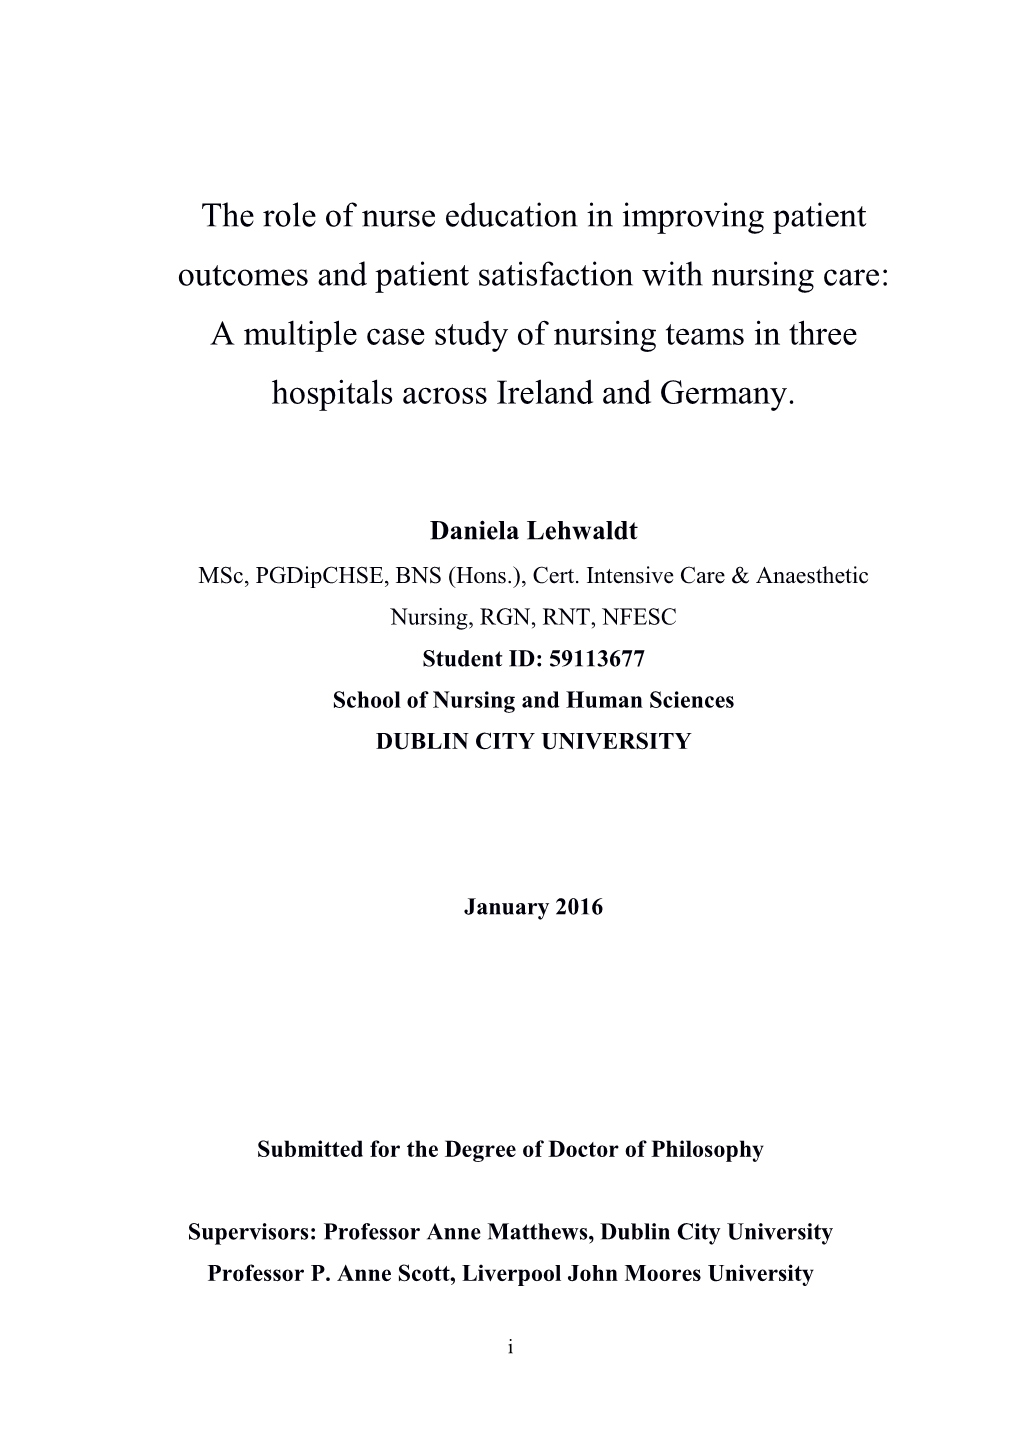 The Role of Nurse Education in Improving Patient Outcomes and Patient Satisfaction with Nursing Care: a Multiple Case Study of Nursing Teams in Three